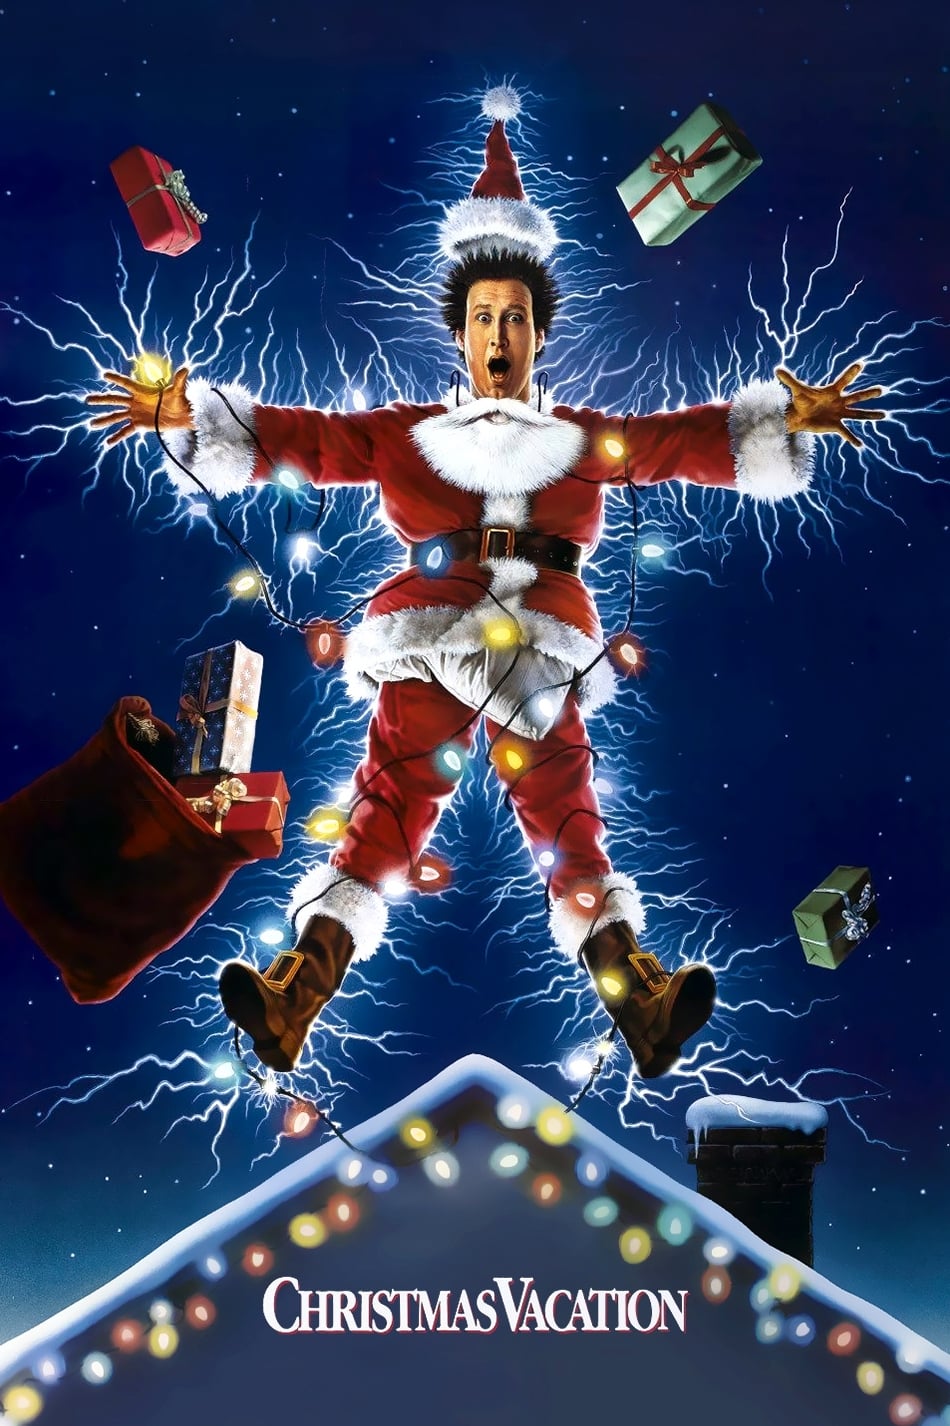 National Lampoon's Christmas Vacation Movie poster